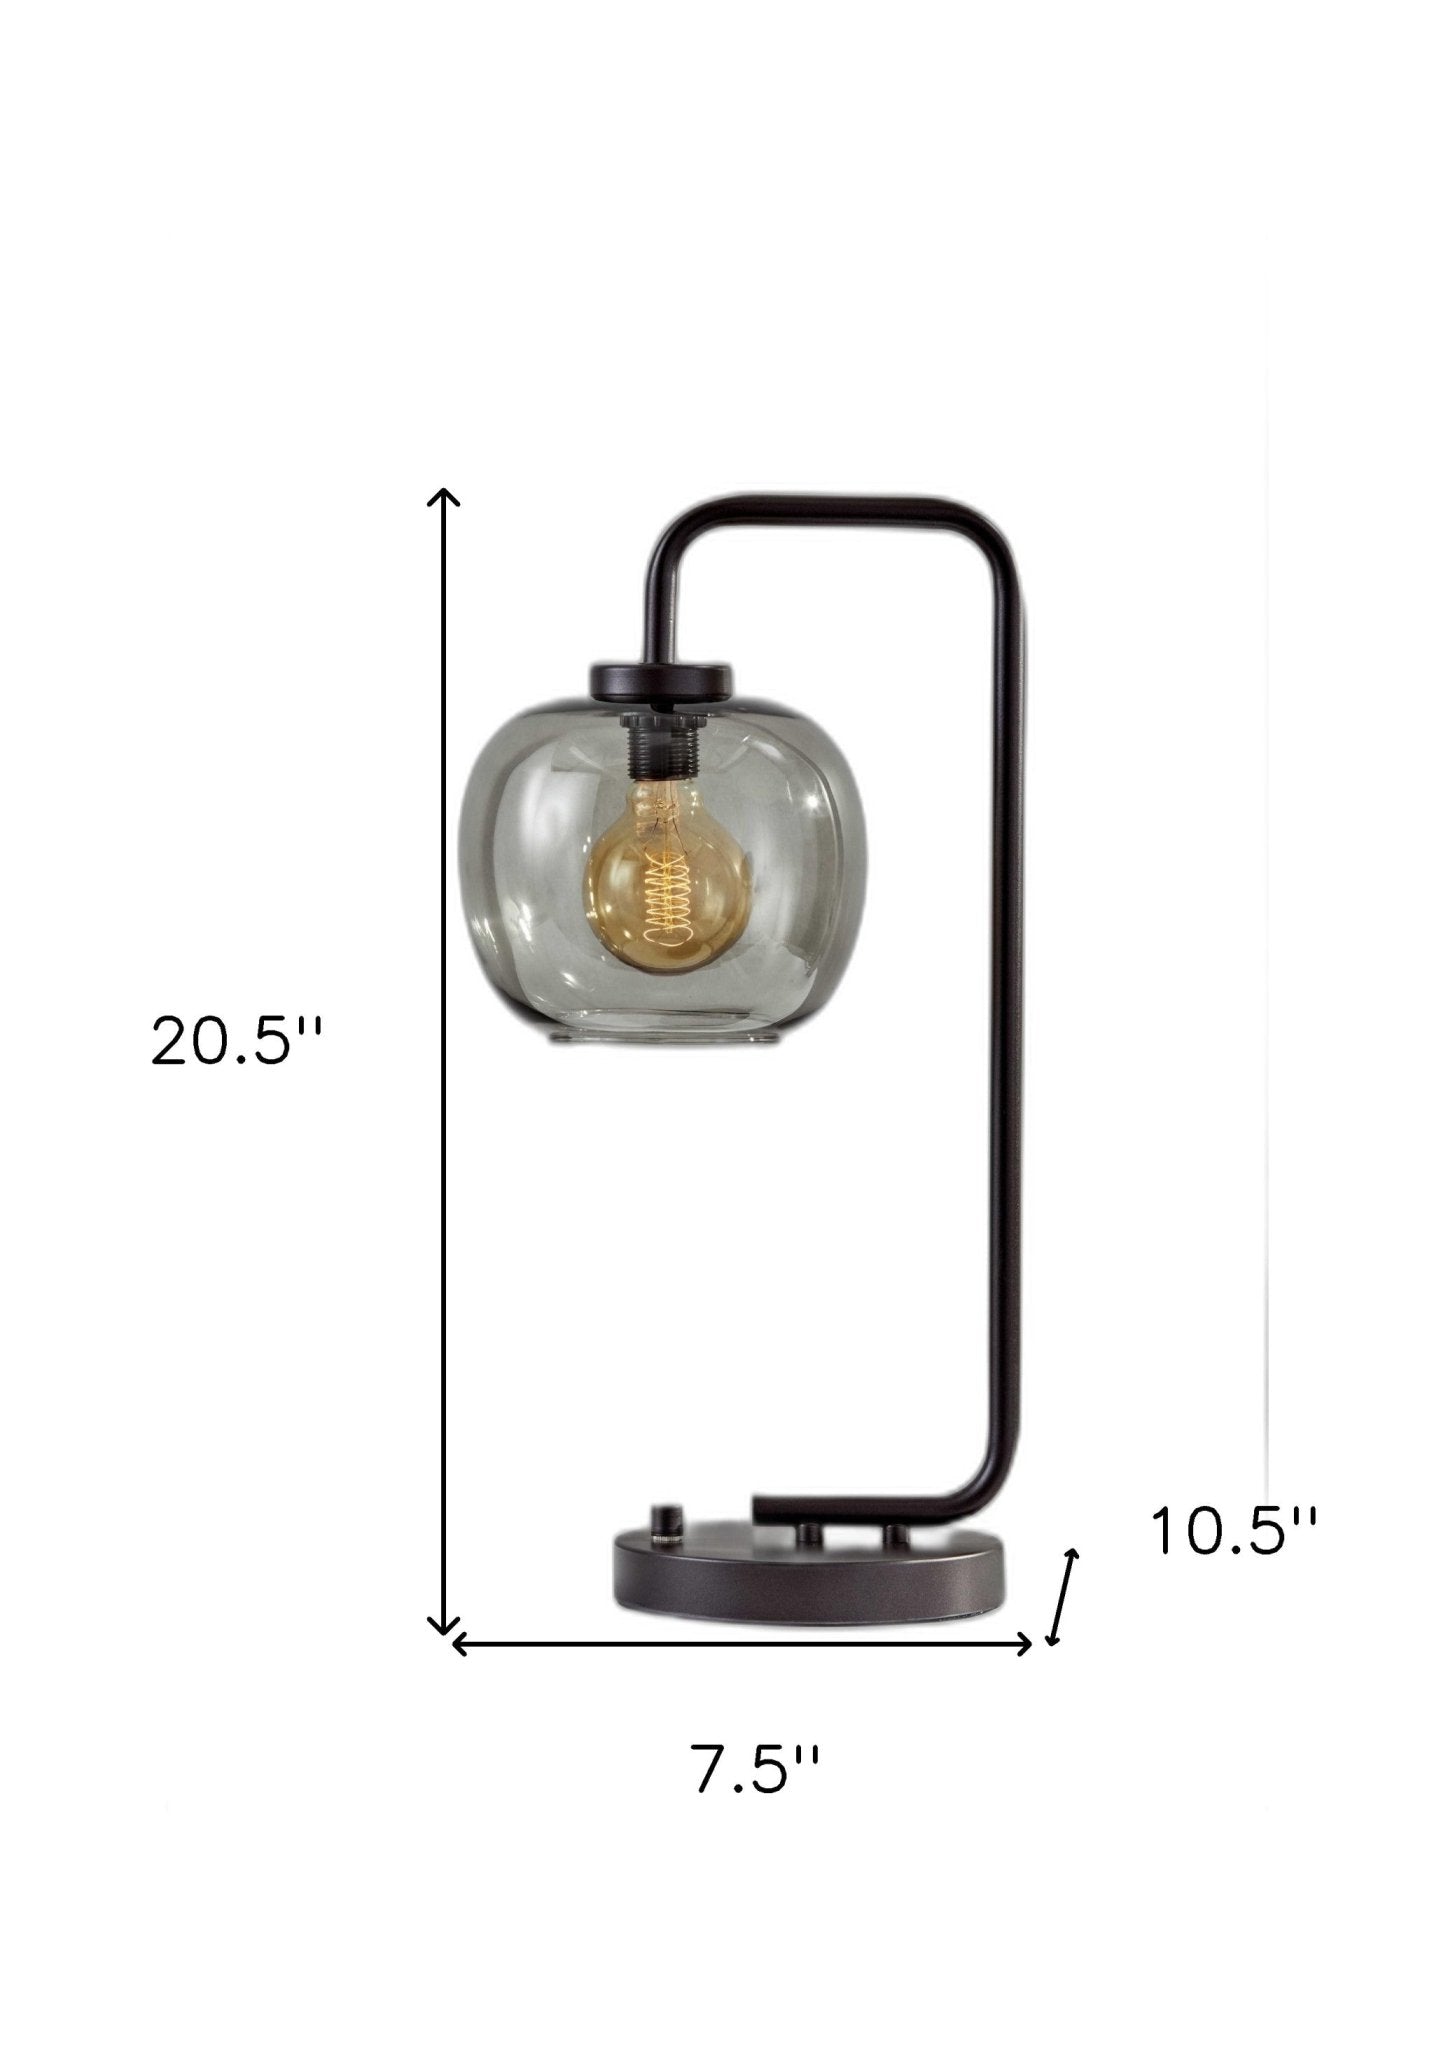 Smoked Glass Globe Shade With Vintage Edison Bulb And Matte Black Metal Arc Table Lamp - Tuesday Morning-Table Lamps